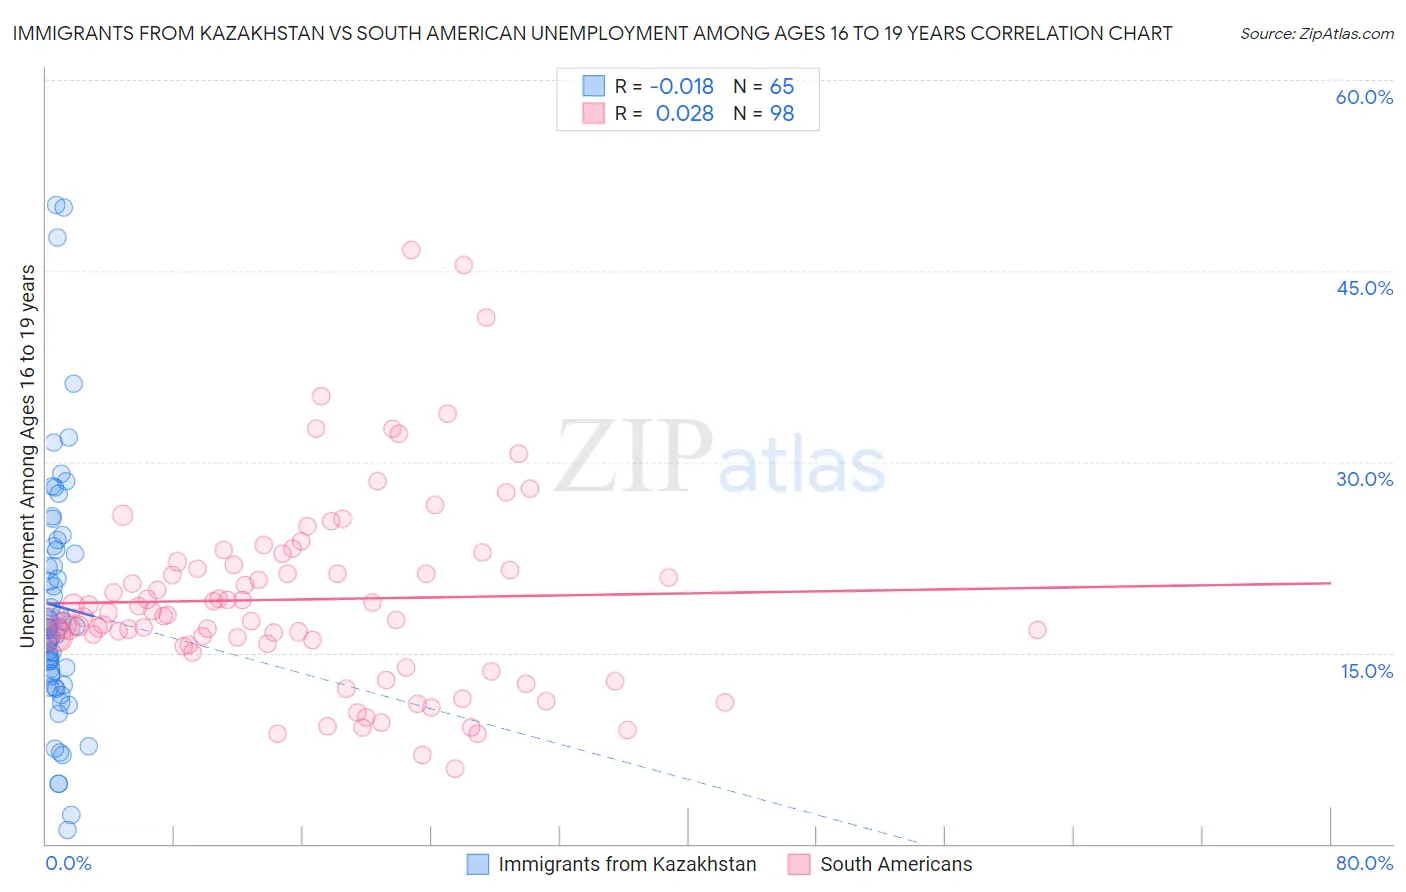 Immigrants from Kazakhstan vs South American Unemployment Among Ages 16 to 19 years